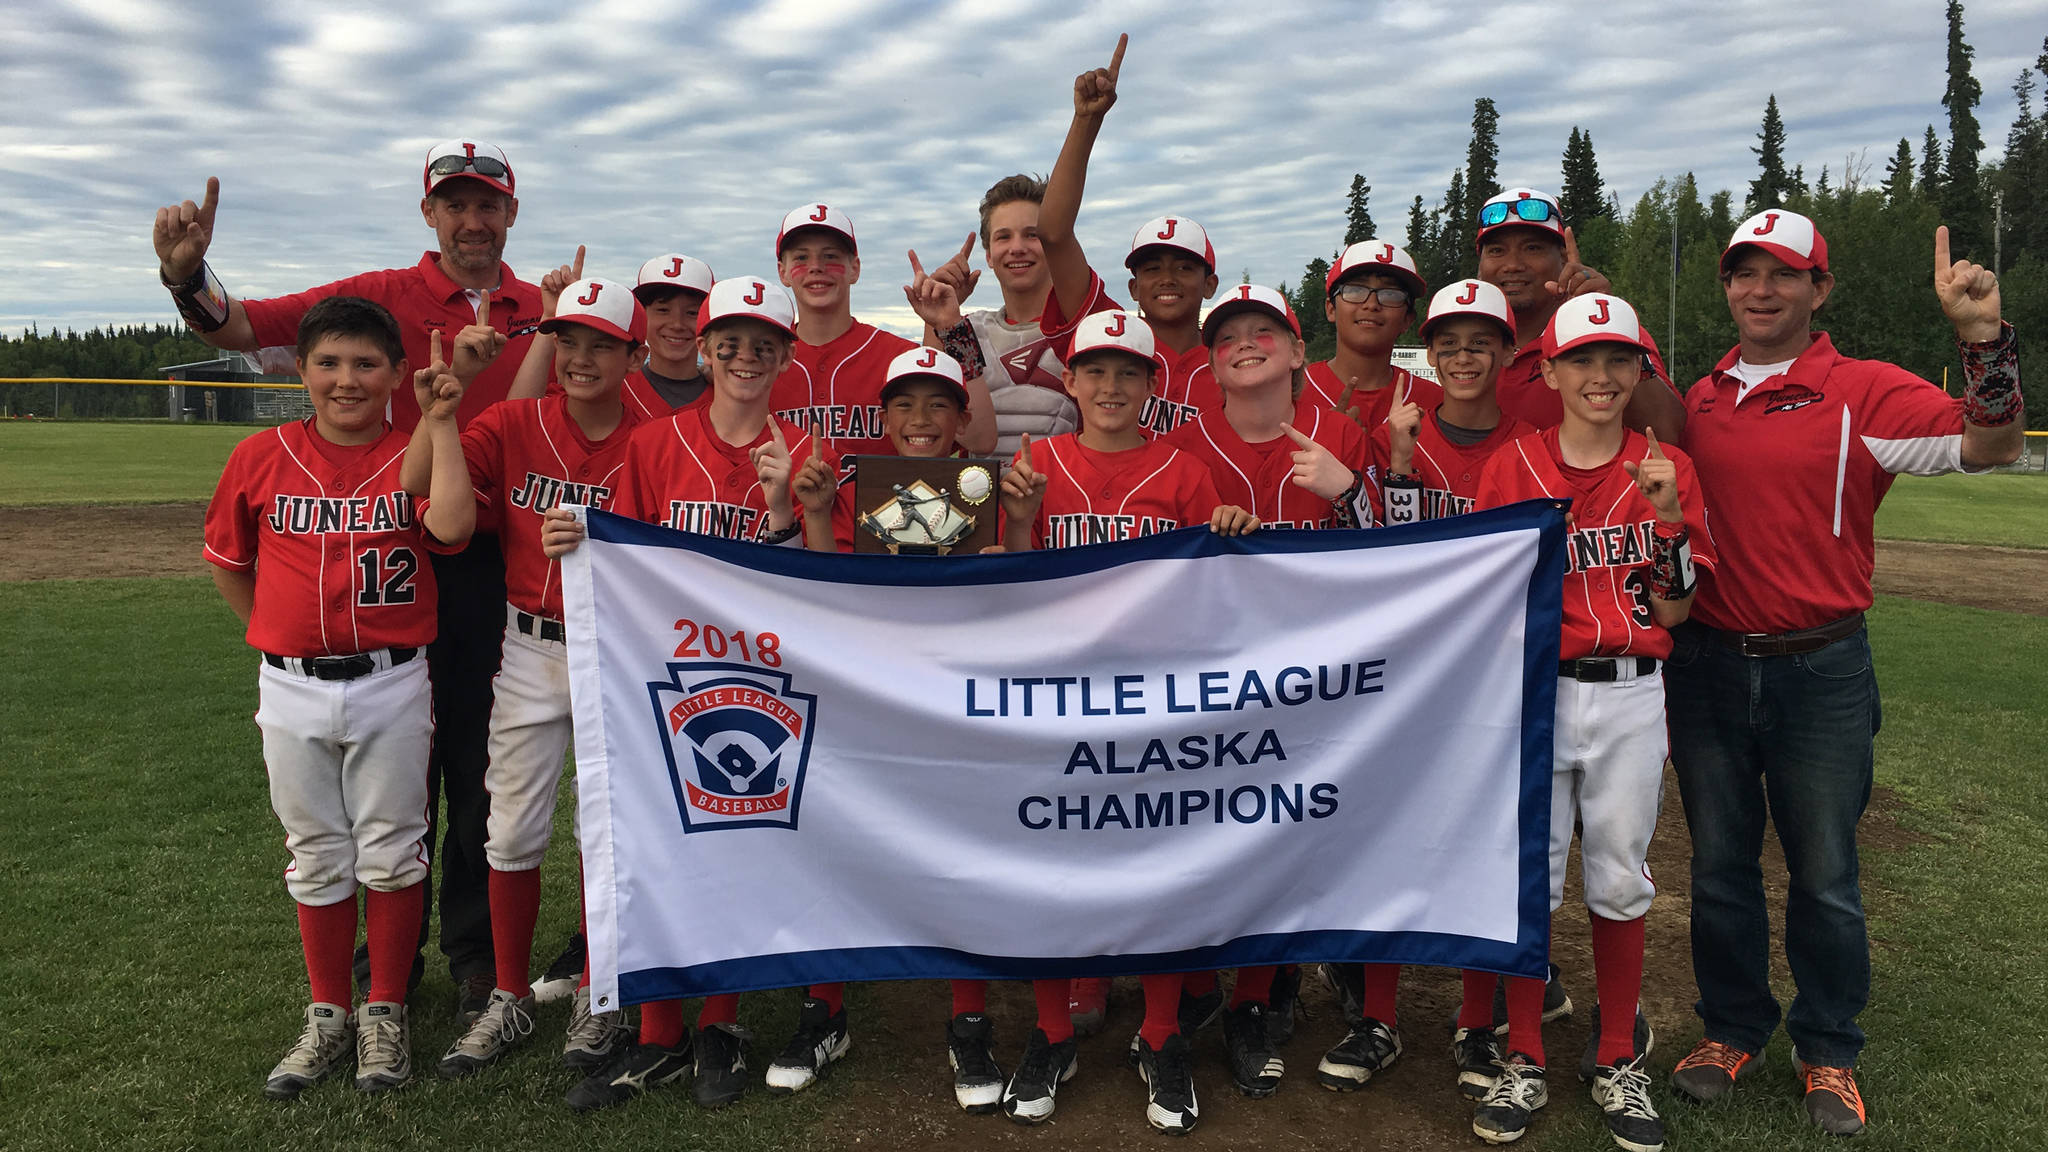 The Gastineau Channel Little League Major All-Stars pose with their state championship banner after defeating Abbott-O-Rabbit Little League, 5-3, on Monday evening at the Abbott-O-Rabbit Field Complex in Anchorage. (Courtesy Photo | David Buss)